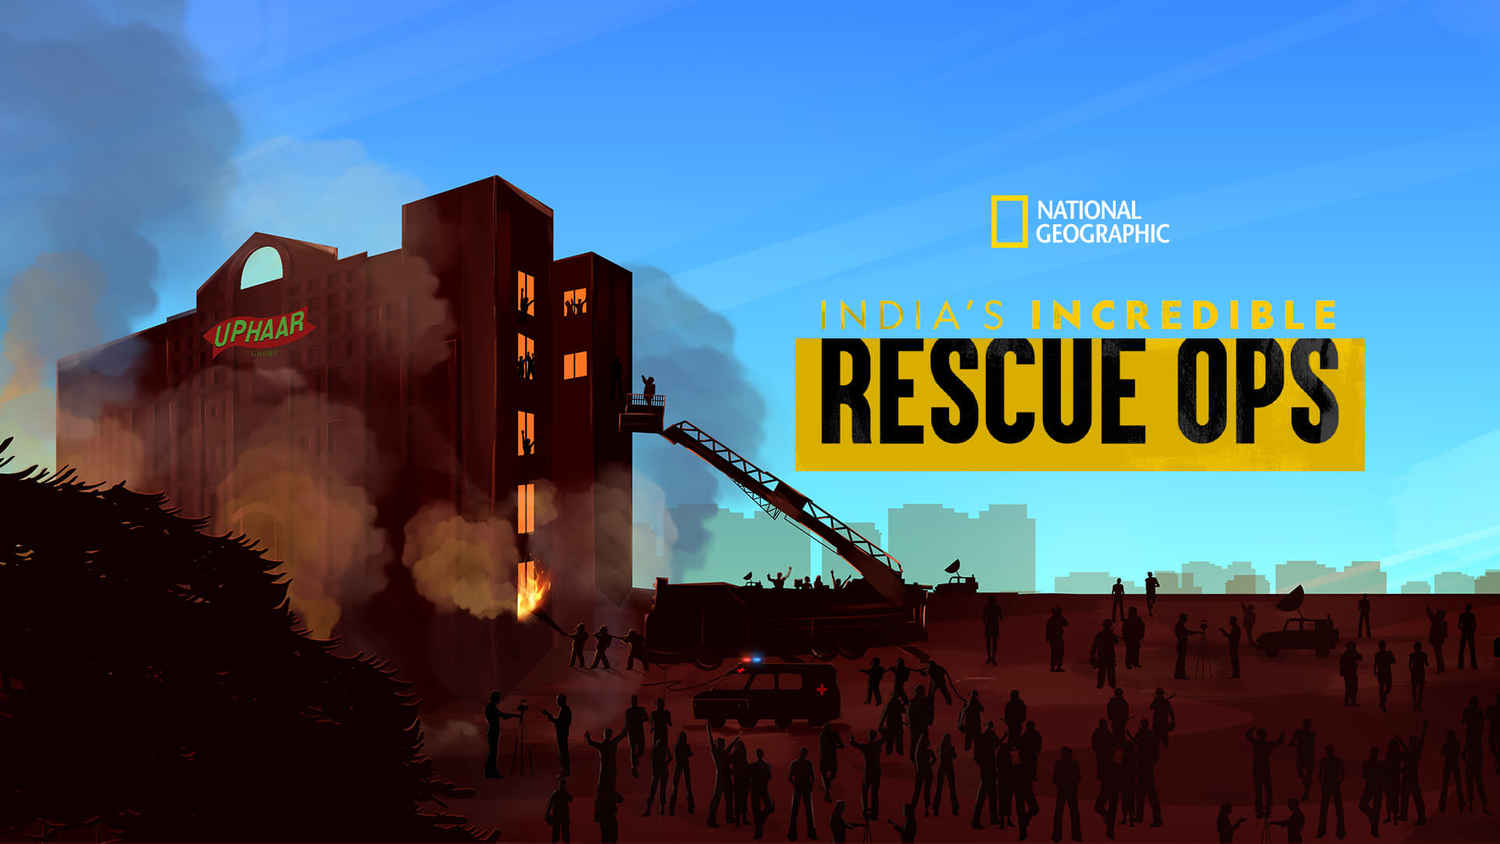 India's Incredible Rescue Ops